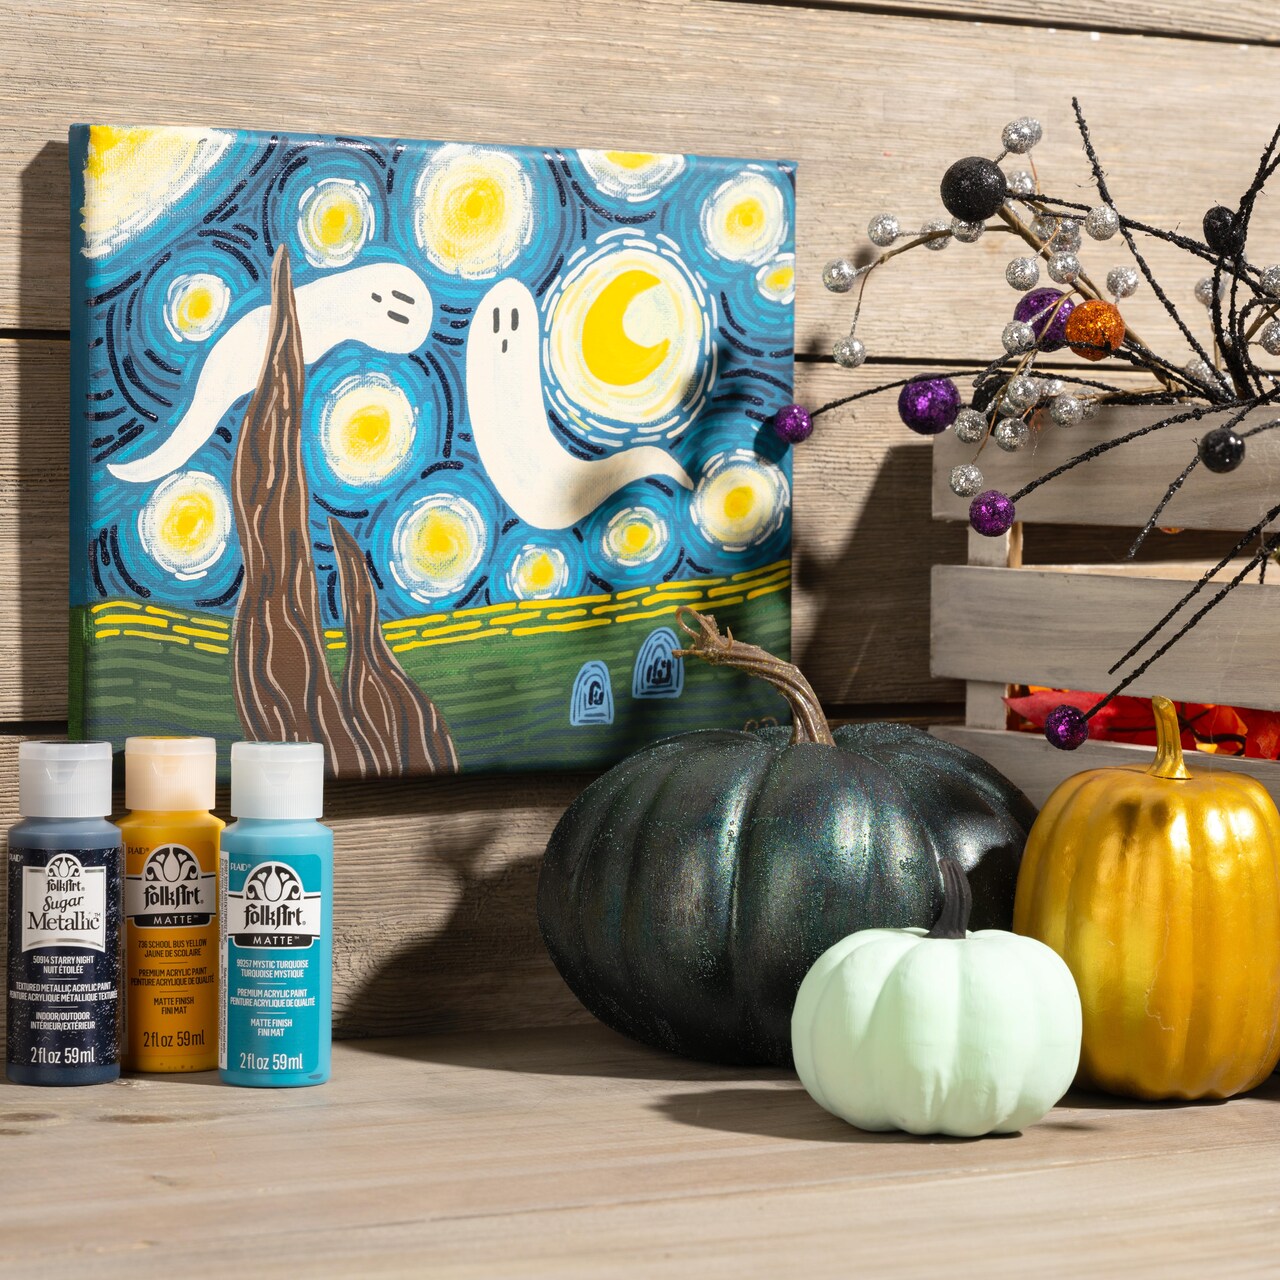 Painted Vincent Van Gogh Inspired Halloween Scene with FolkArt Acrylics